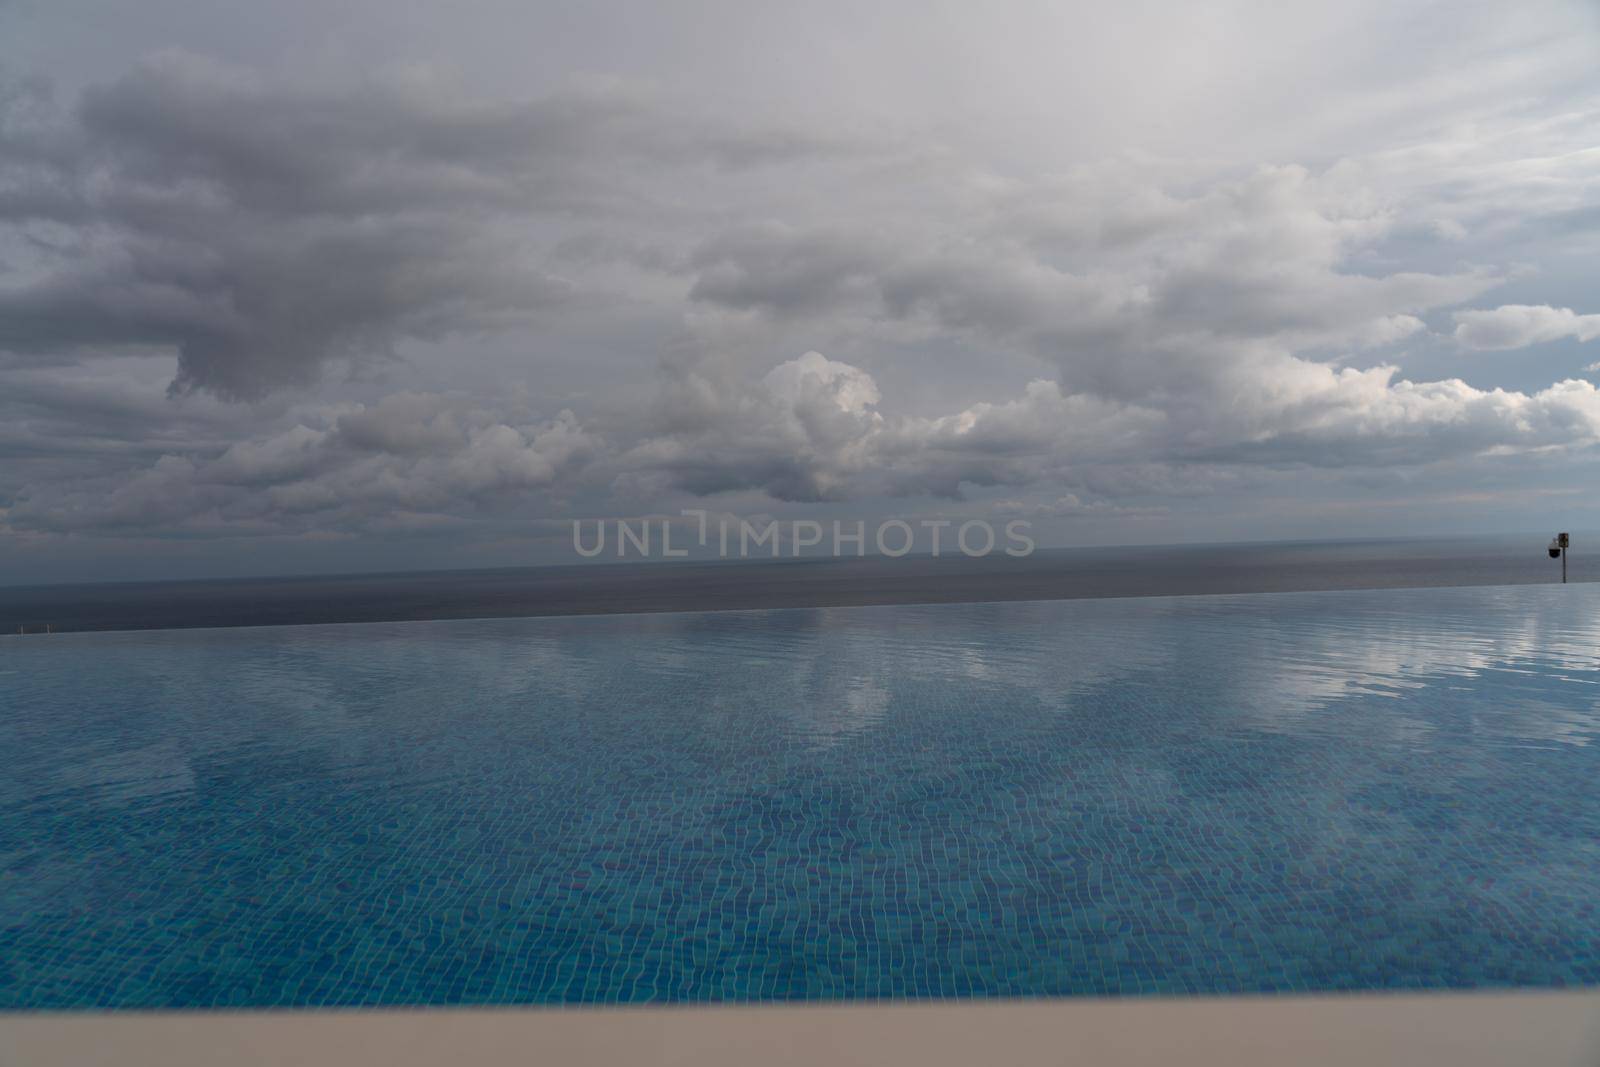 Infinity pool with sea and ocean views on the background of the sky with clouds. The clouds are reflected in the pool